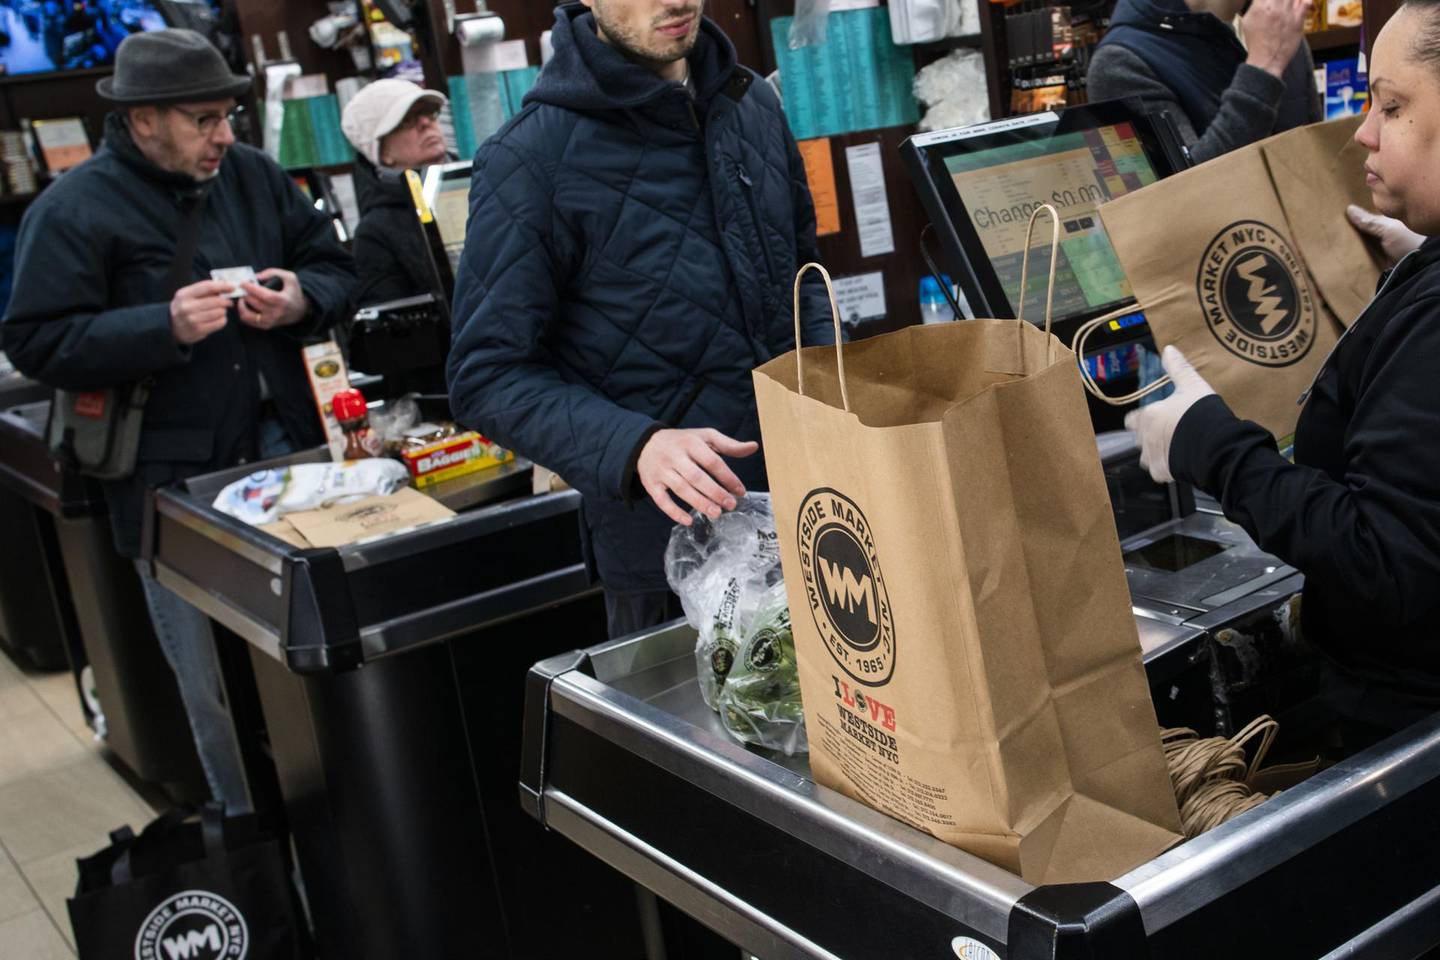 NEW YORK, NY - MARCH 01: A customer get his groceries on reusable paper bags at a local supermarket on March 1, 2020 in New York City. New York State is banning the distribution of single-use plastic bags, trying to reduce billions of discarded bags that ends into landfills, rivers and oceans.   Eduardo Munoz Alvarez/Getty Images/AFP
== FOR NEWSPAPERS, INTERNET, TELCOS & TELEVISION USE ONLY ==
